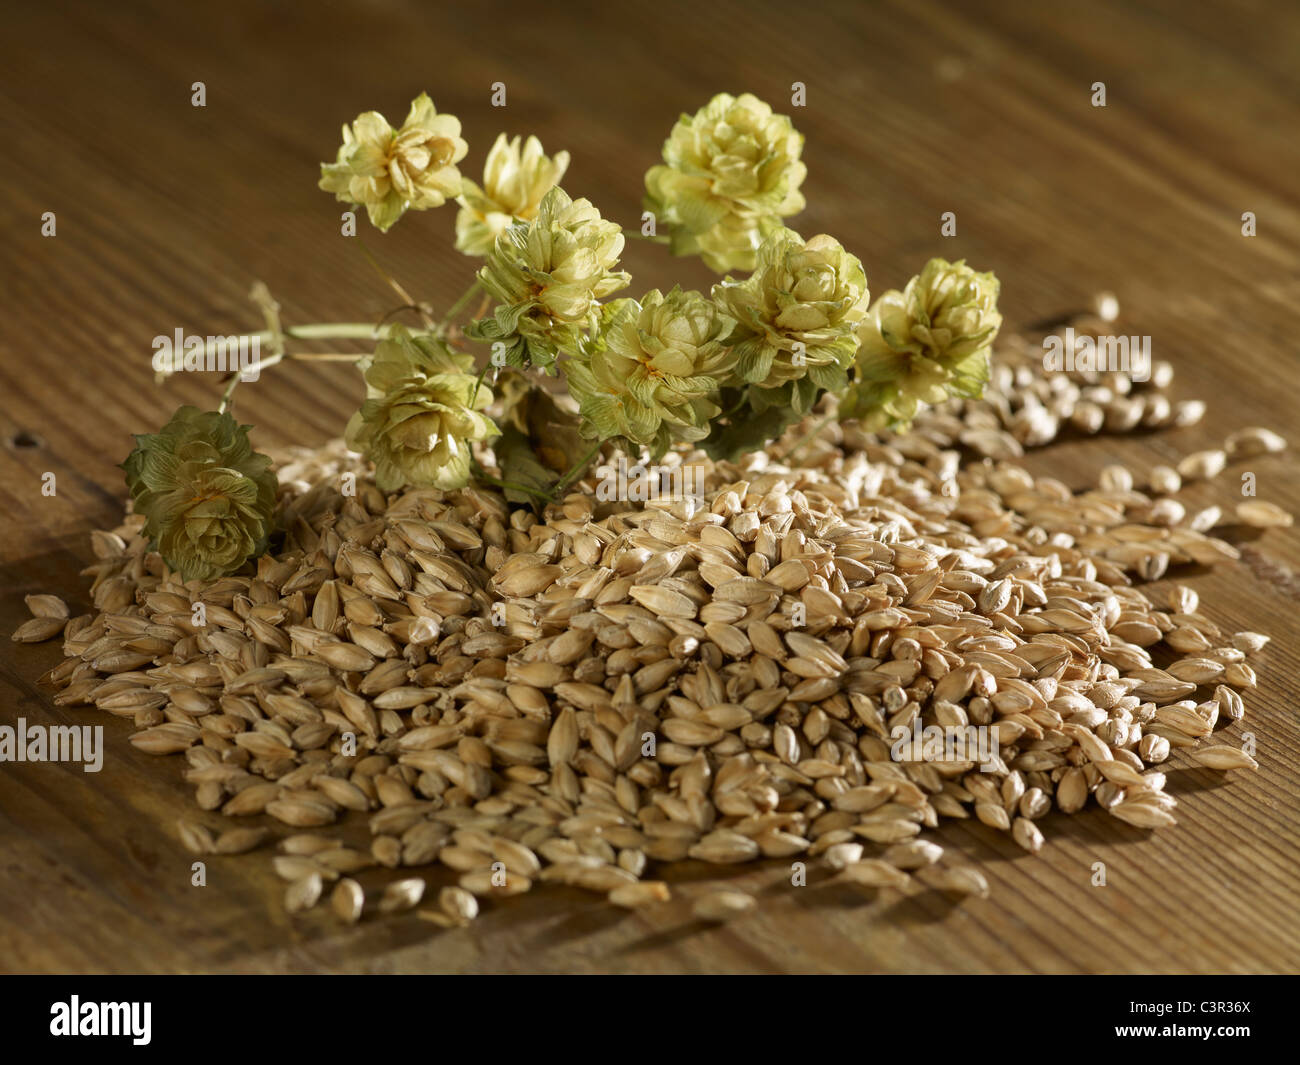 Malting barley and hops on wooden surface Stock Photo